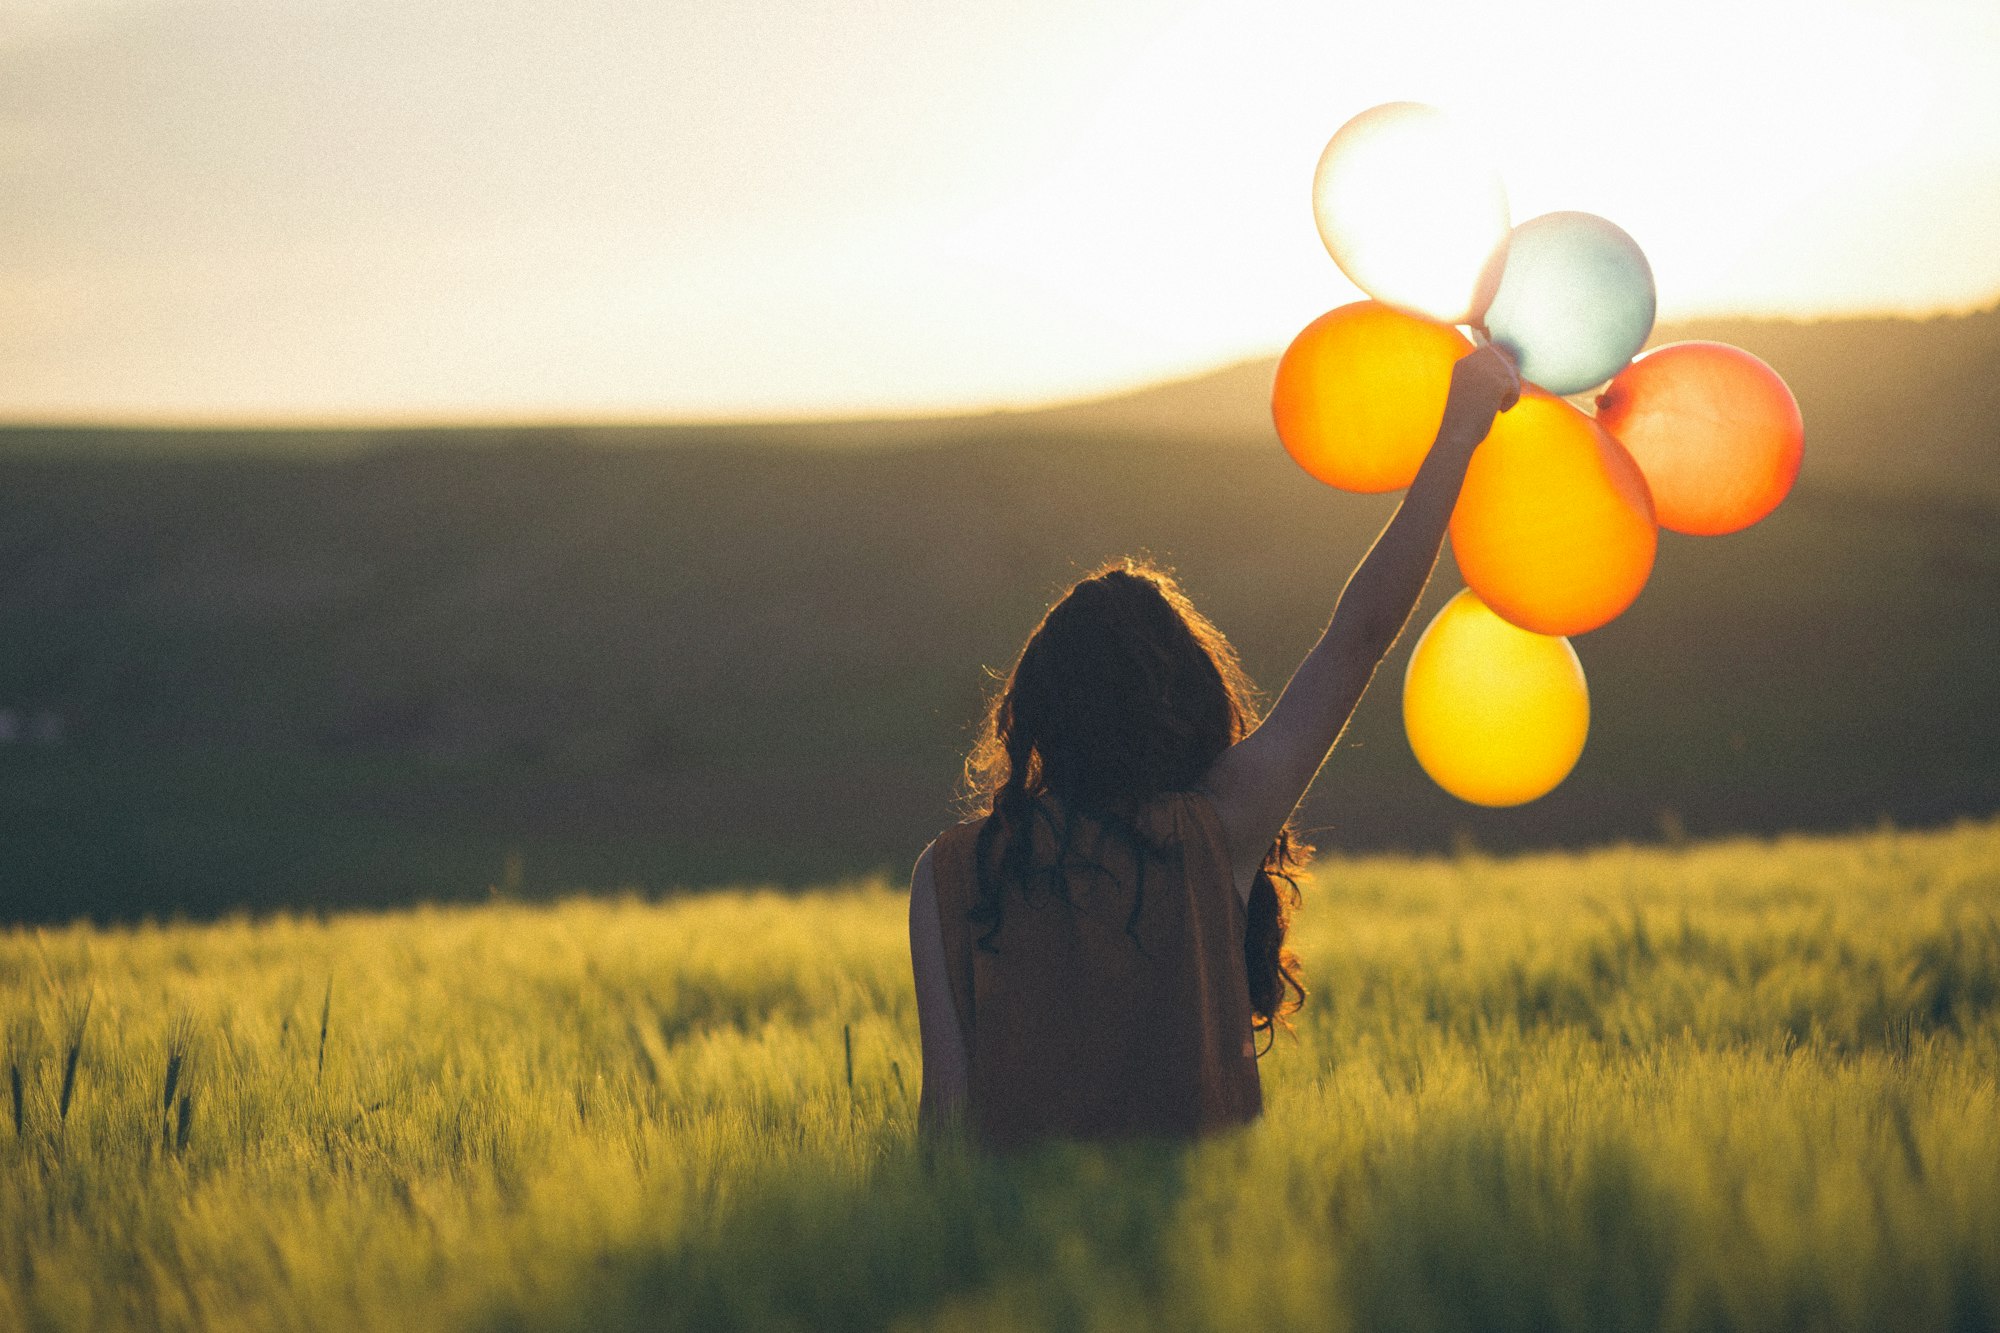 unknown person holding balloons outdoors